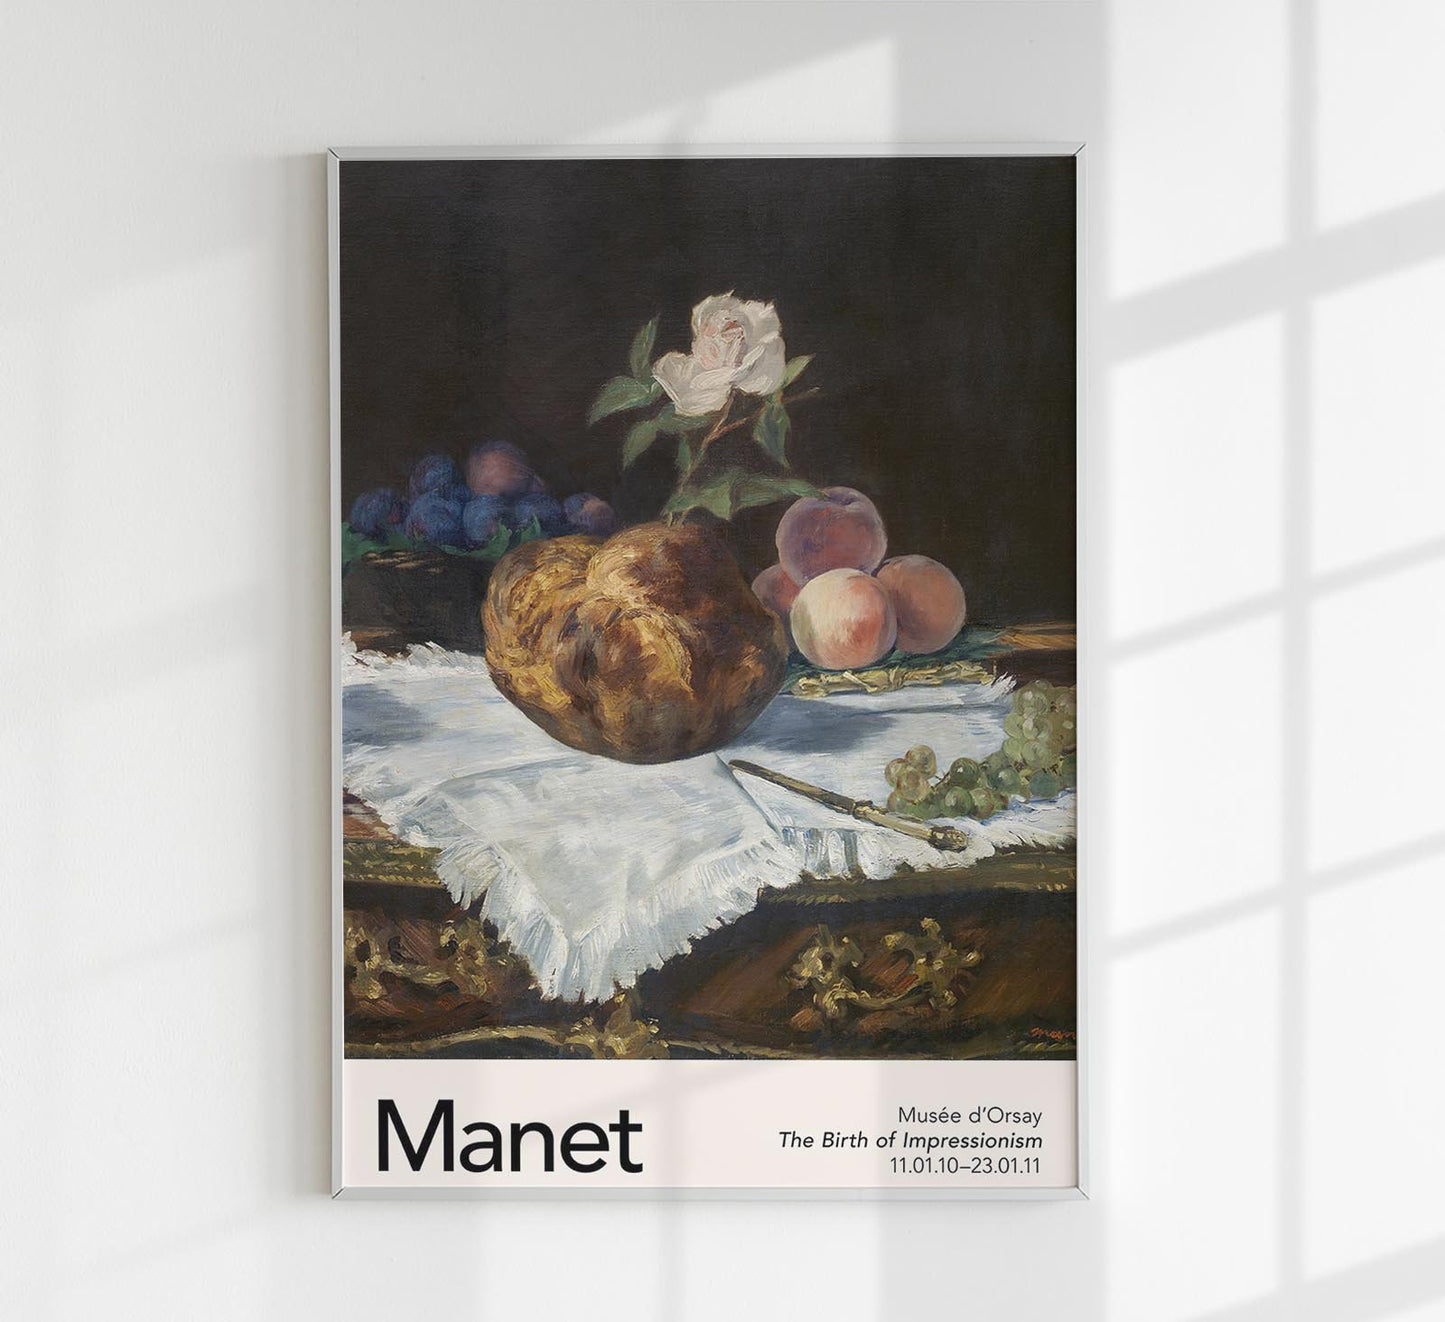 The Brioche by Manet Exhibition Poster